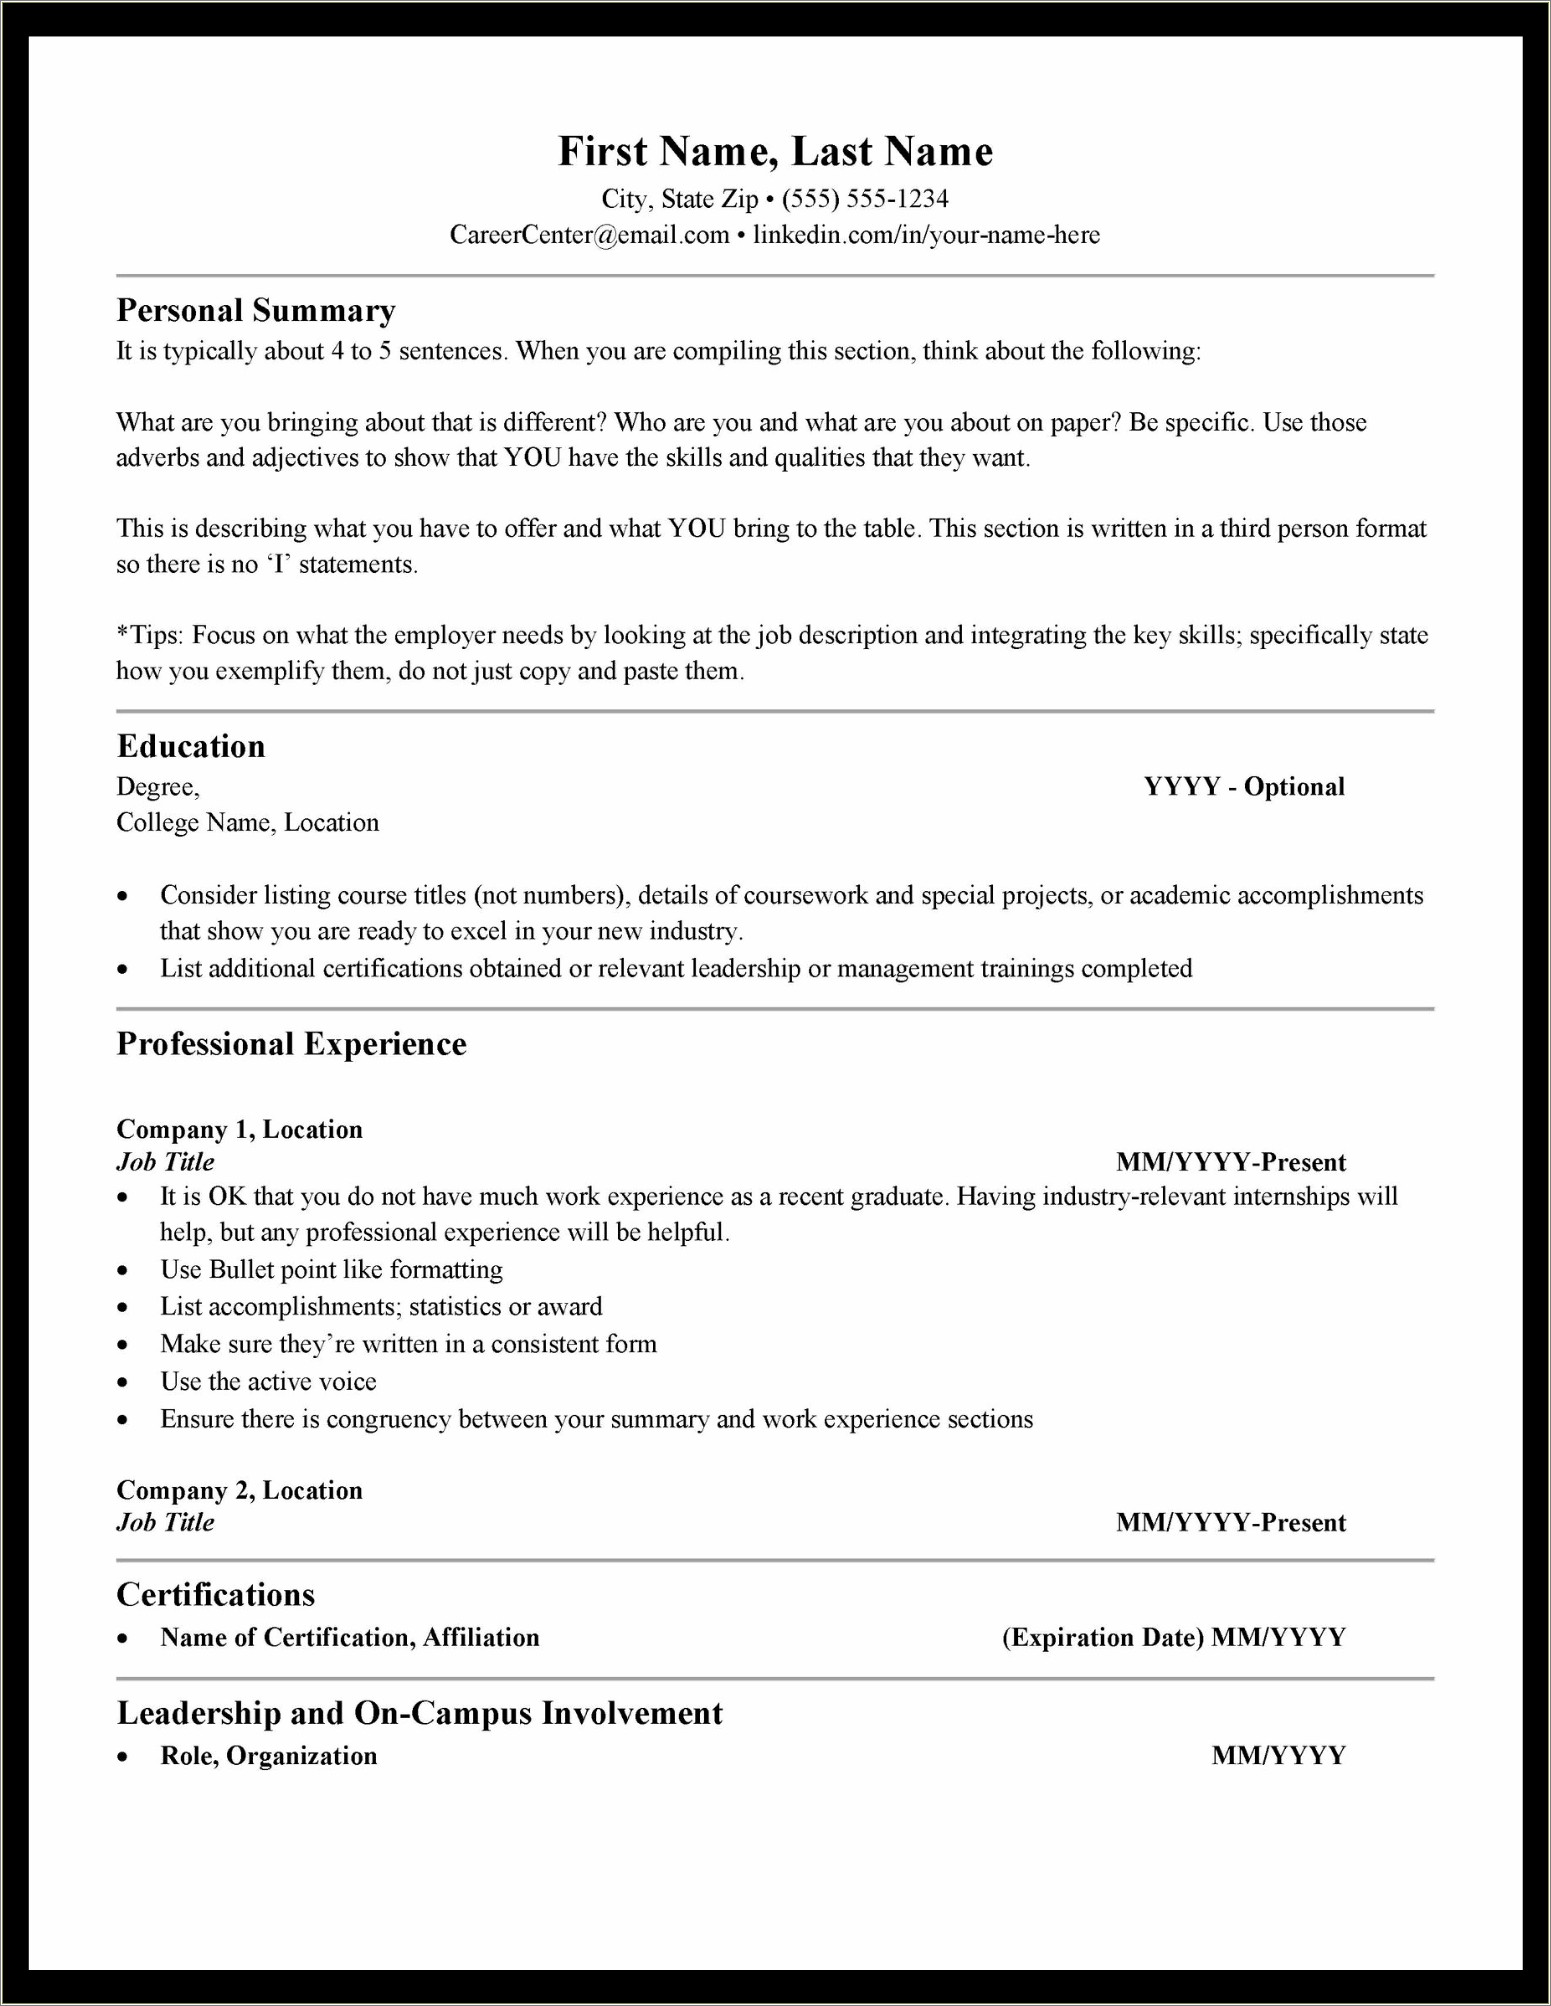 Resume Templates For Higher Education Administration